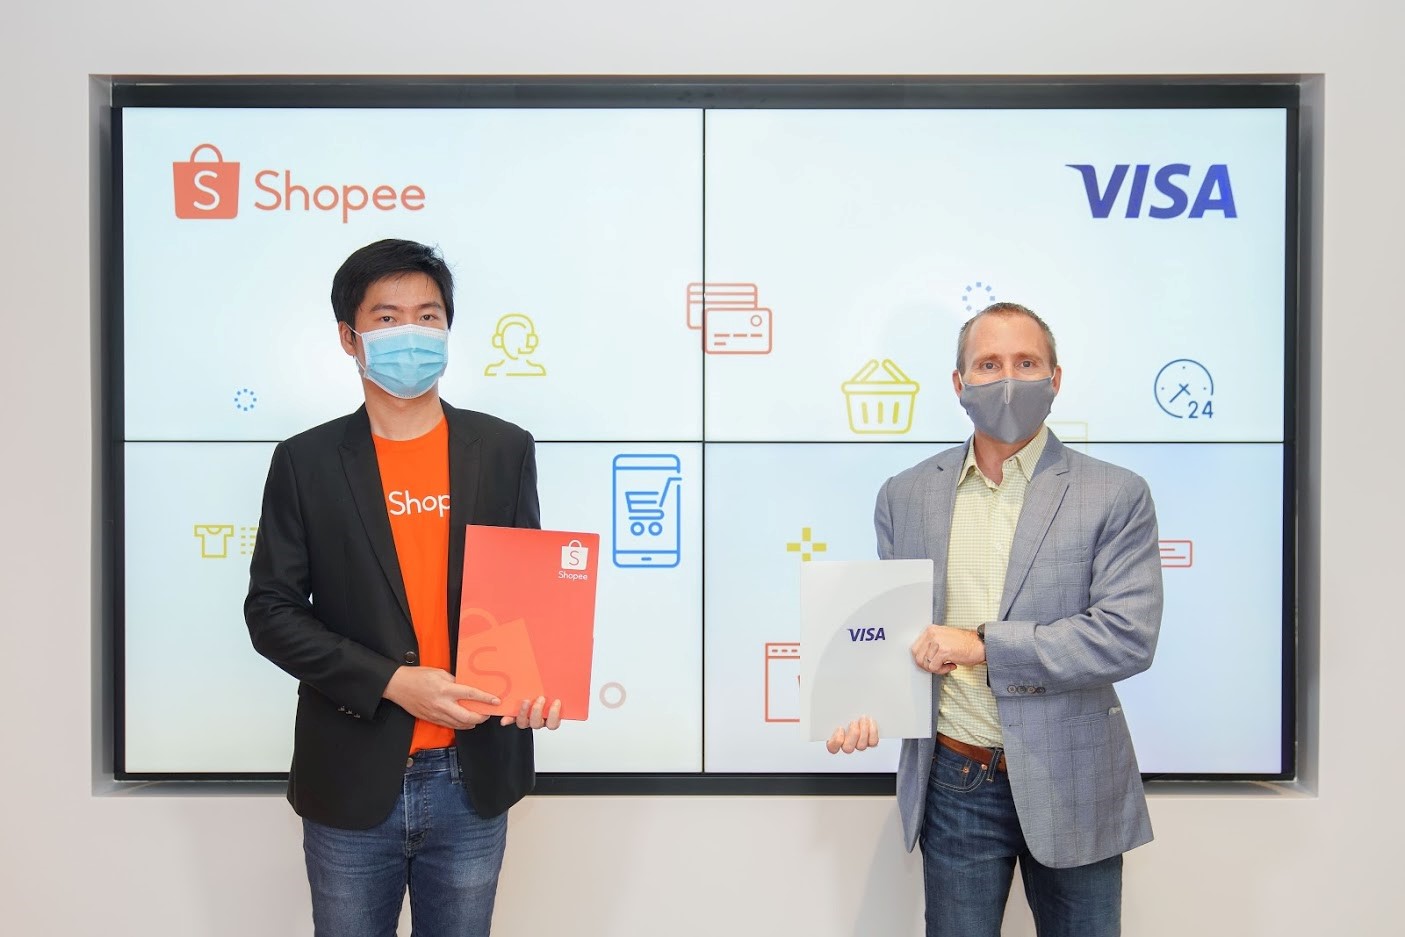 Shopee creates new shopping experience for consumers, entrepreneurs